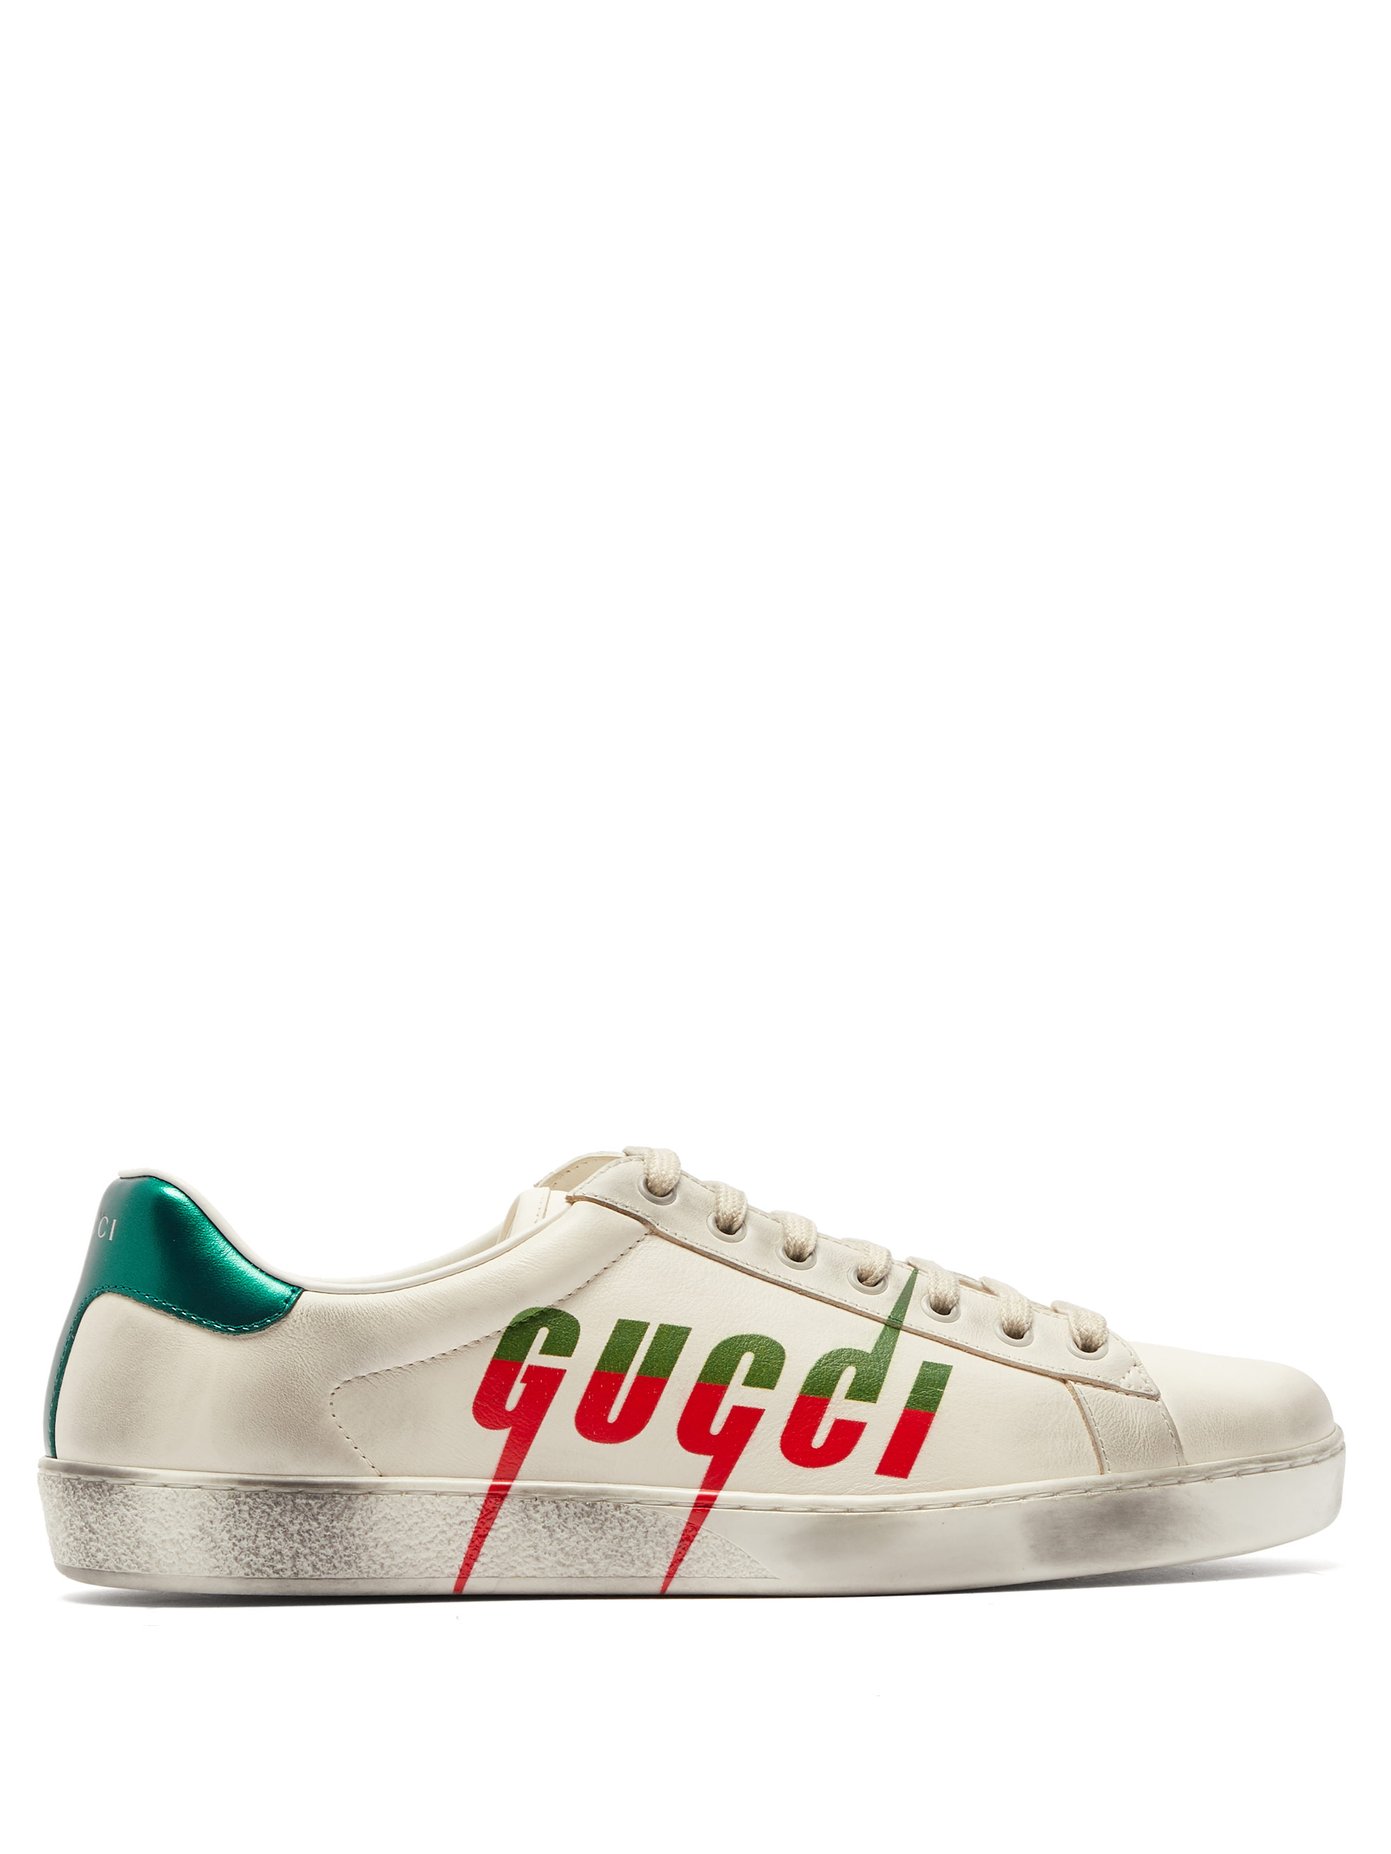 gucci trainers size 2.5